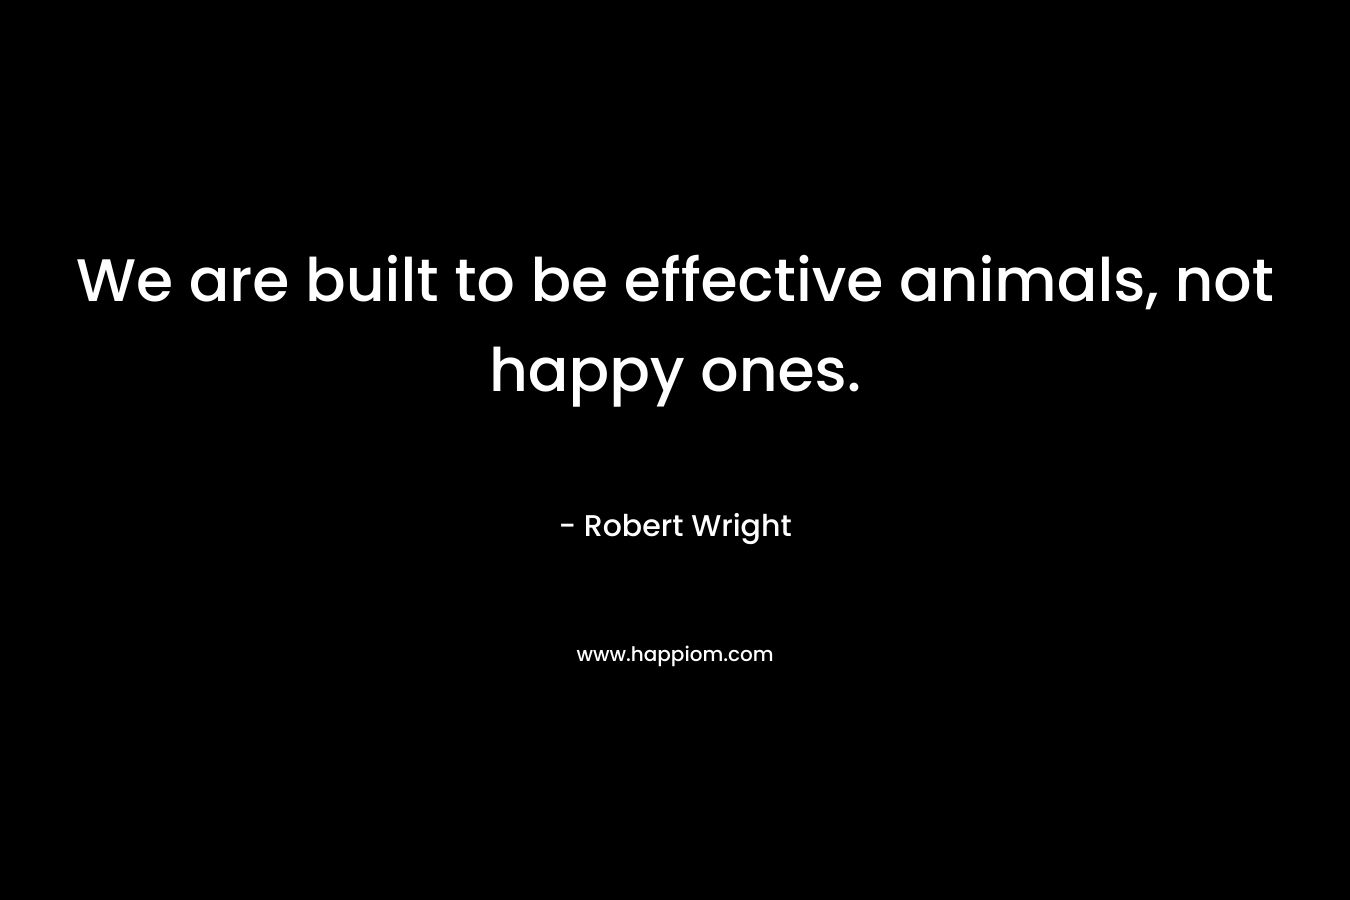 We are built to be effective animals, not happy ones.